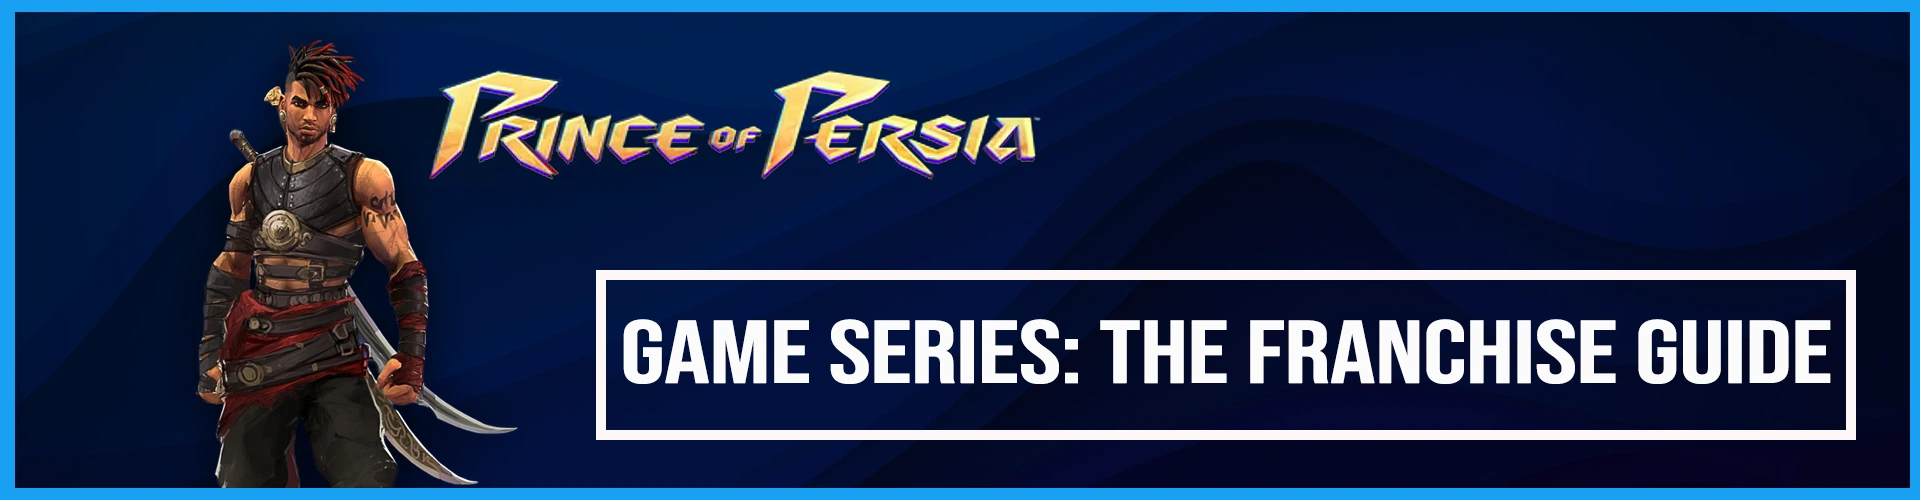 Prince of Persia Game Serie: The Franchise